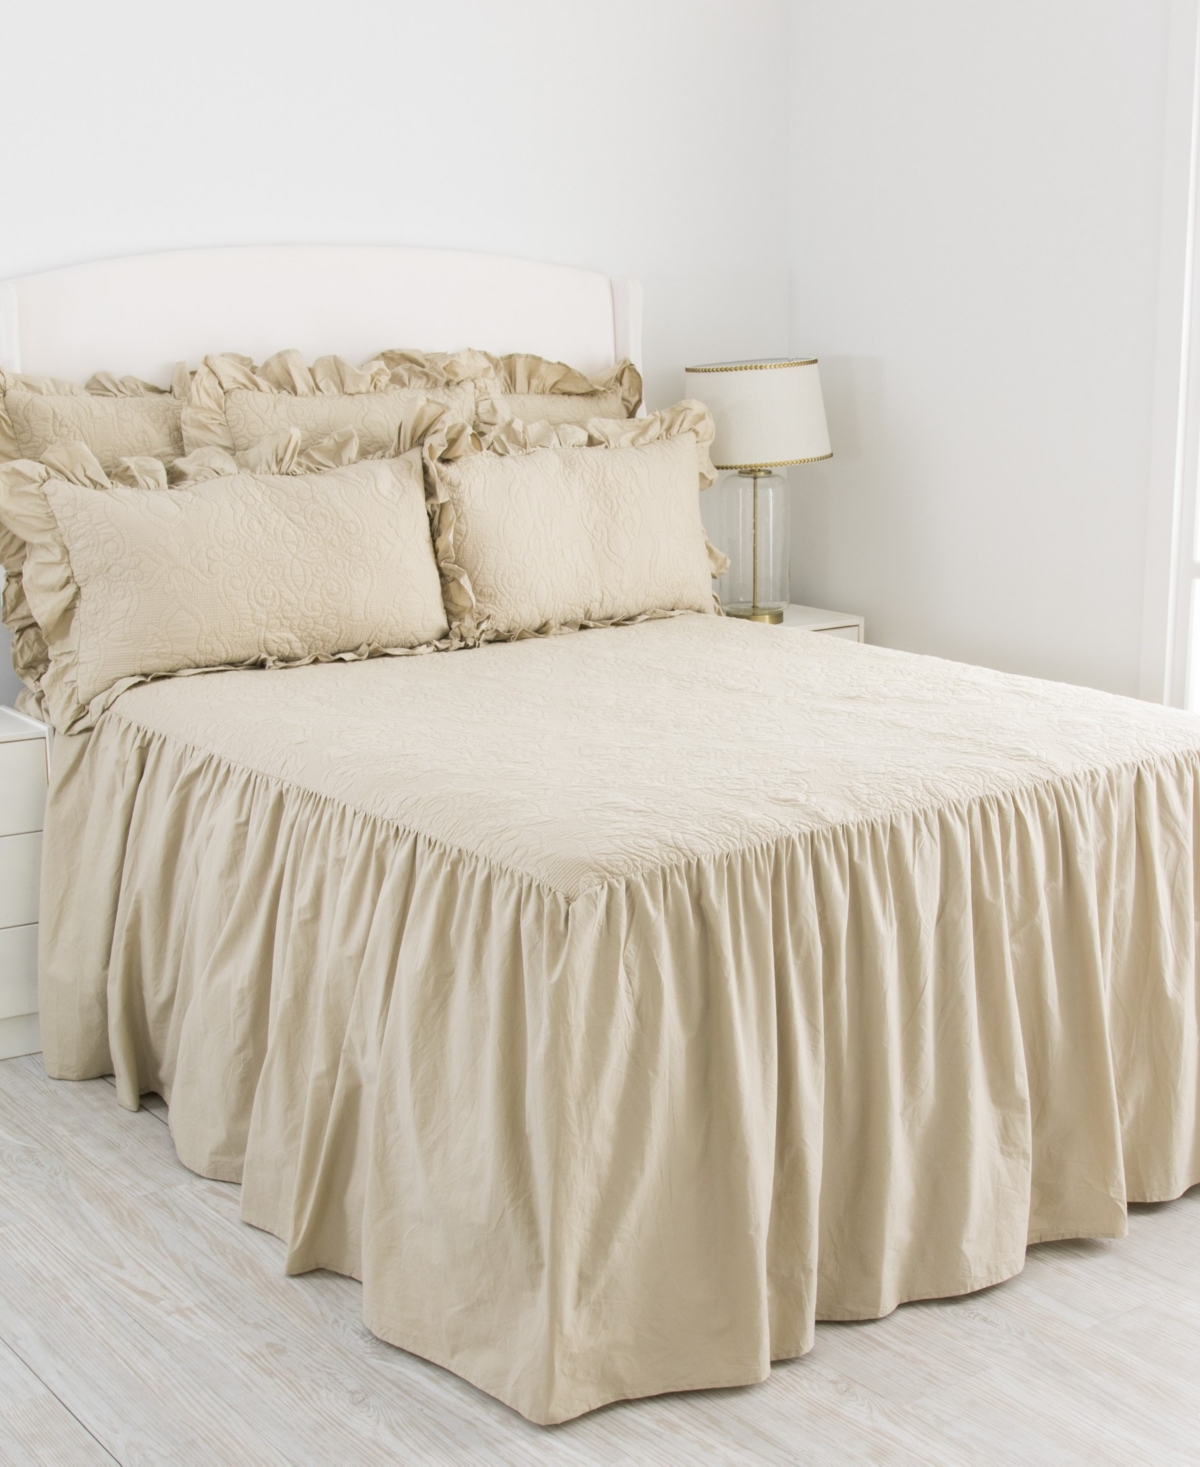 Elise And James Home Elise James Home Oma Ruffle Coverlet Quilt Bedspread Set Collection In White